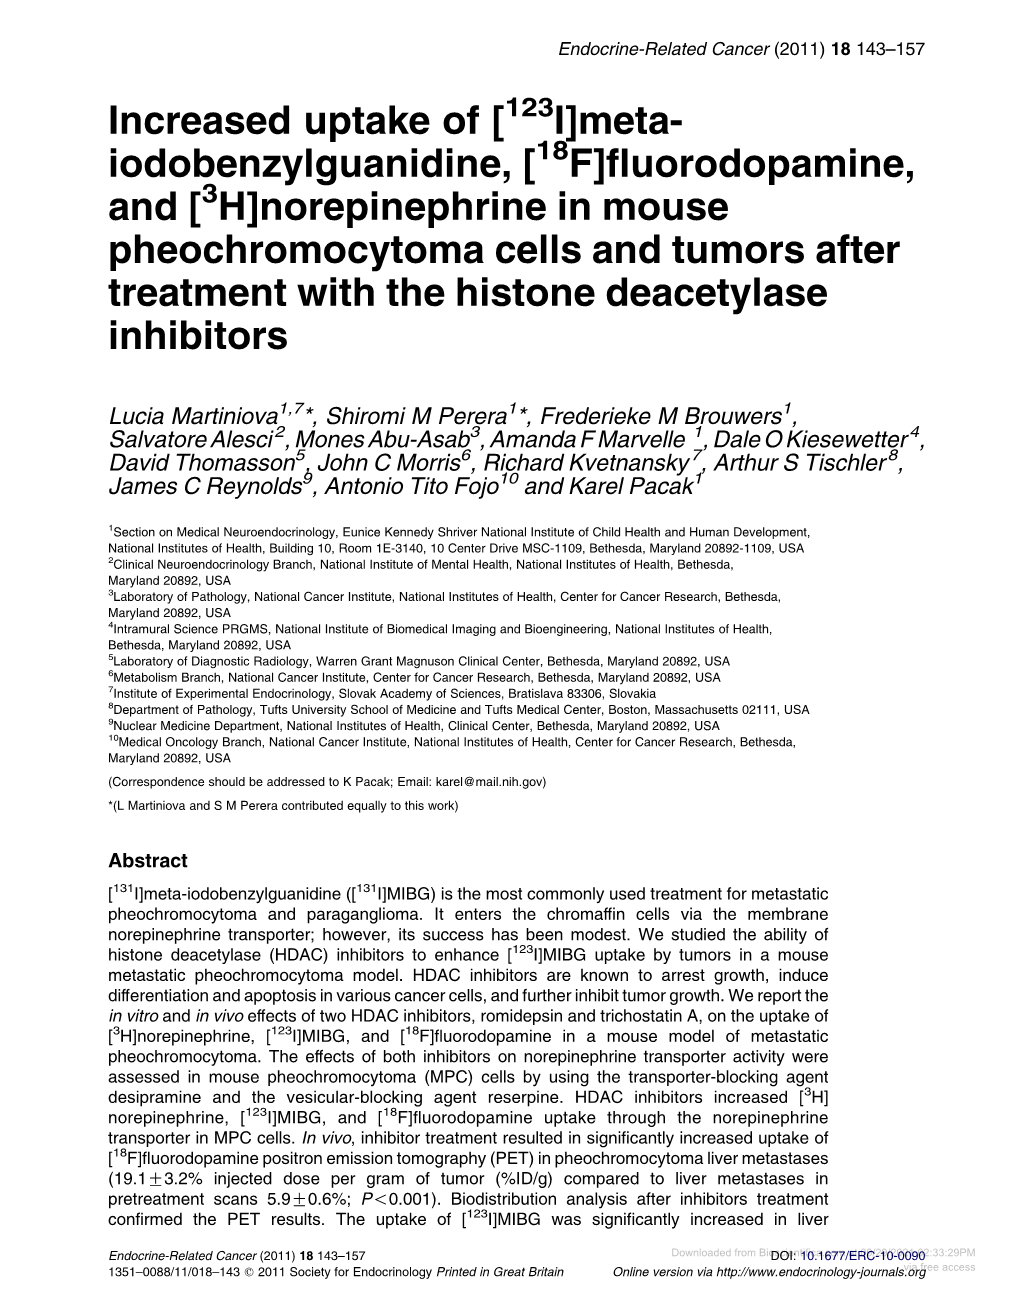 Norepinephrine in Mouse Pheochromocytoma Cells and Tumors After Treatment with the Histone Deacetylase Inhibitors